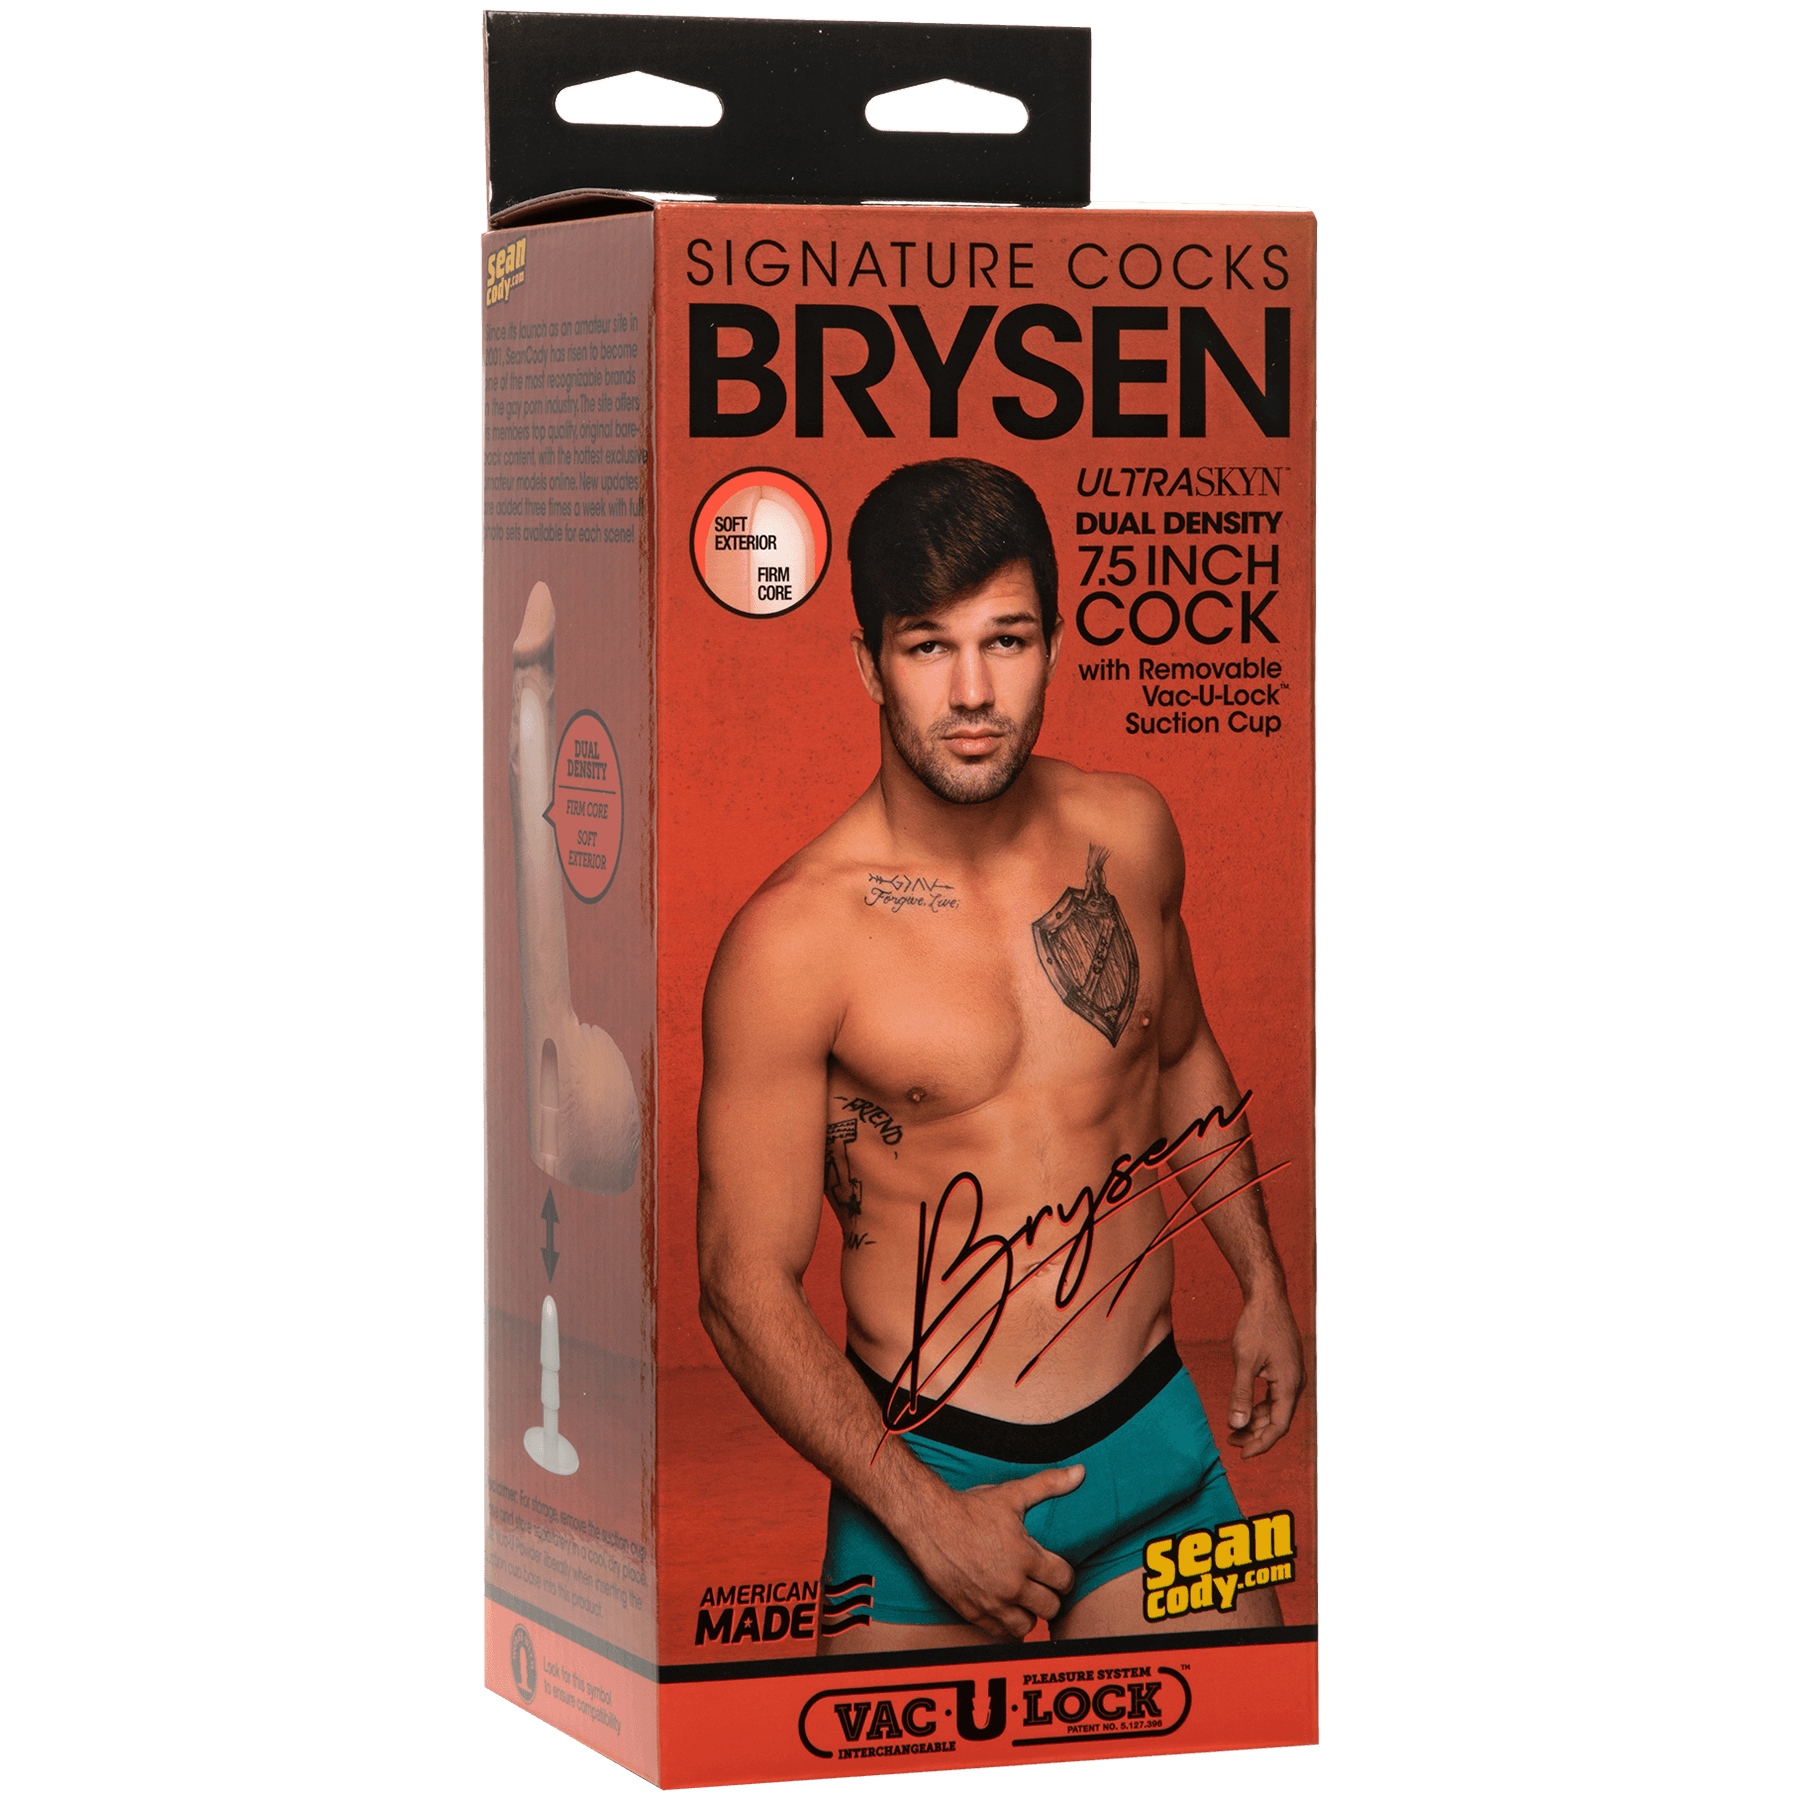 Doc Johnson Signature Cocks Brysen 7.5 Cock - Buy At Luxury Toy X - Free 3-Day Shipping